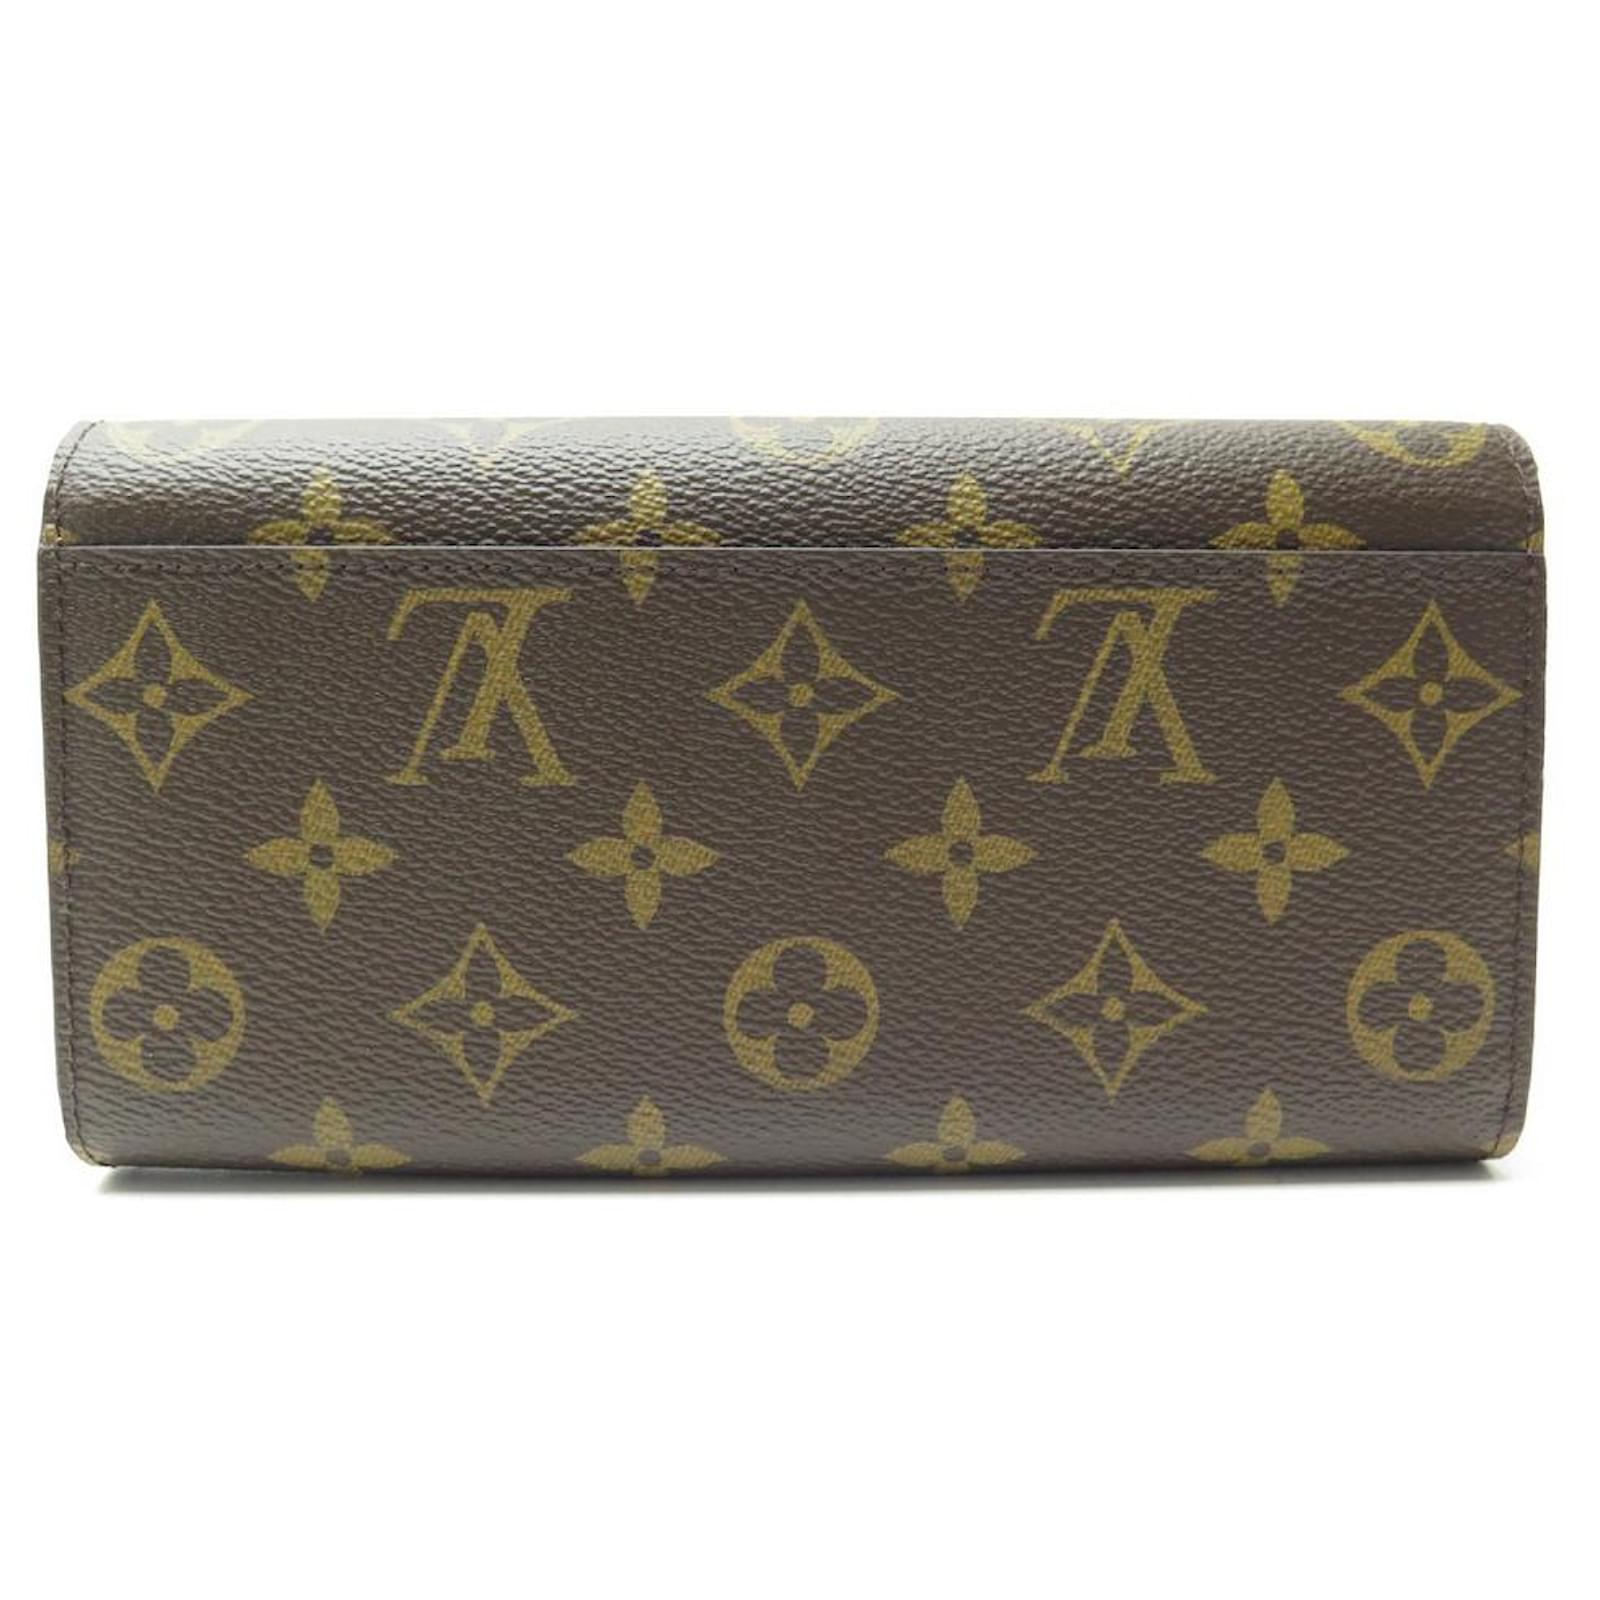 Louis Vuitton Sarah Wallet Limited Edition Christmas Animation